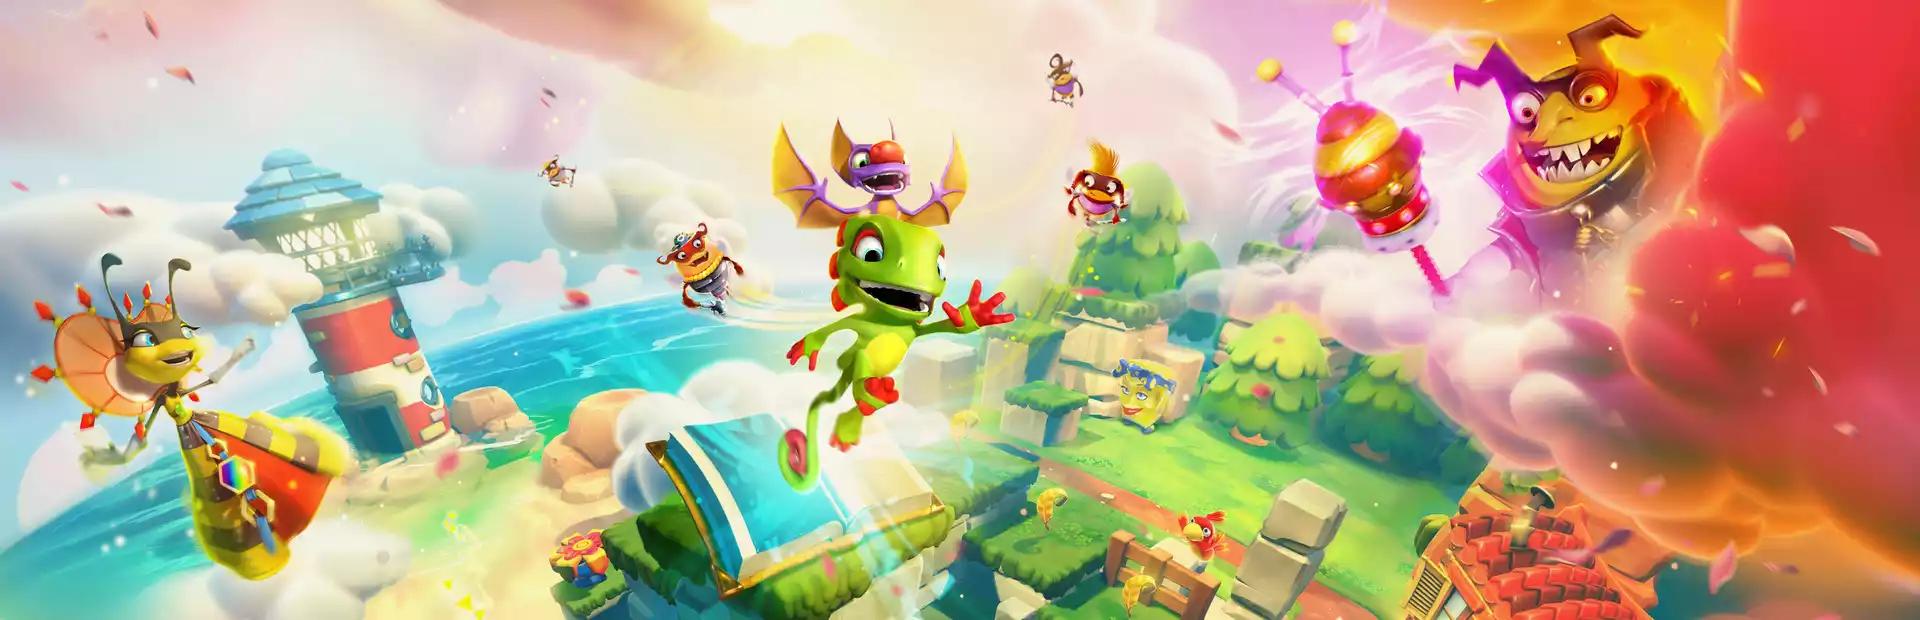 Yooka-Laylee and the Impossible Lair Steam Key GLOBAL